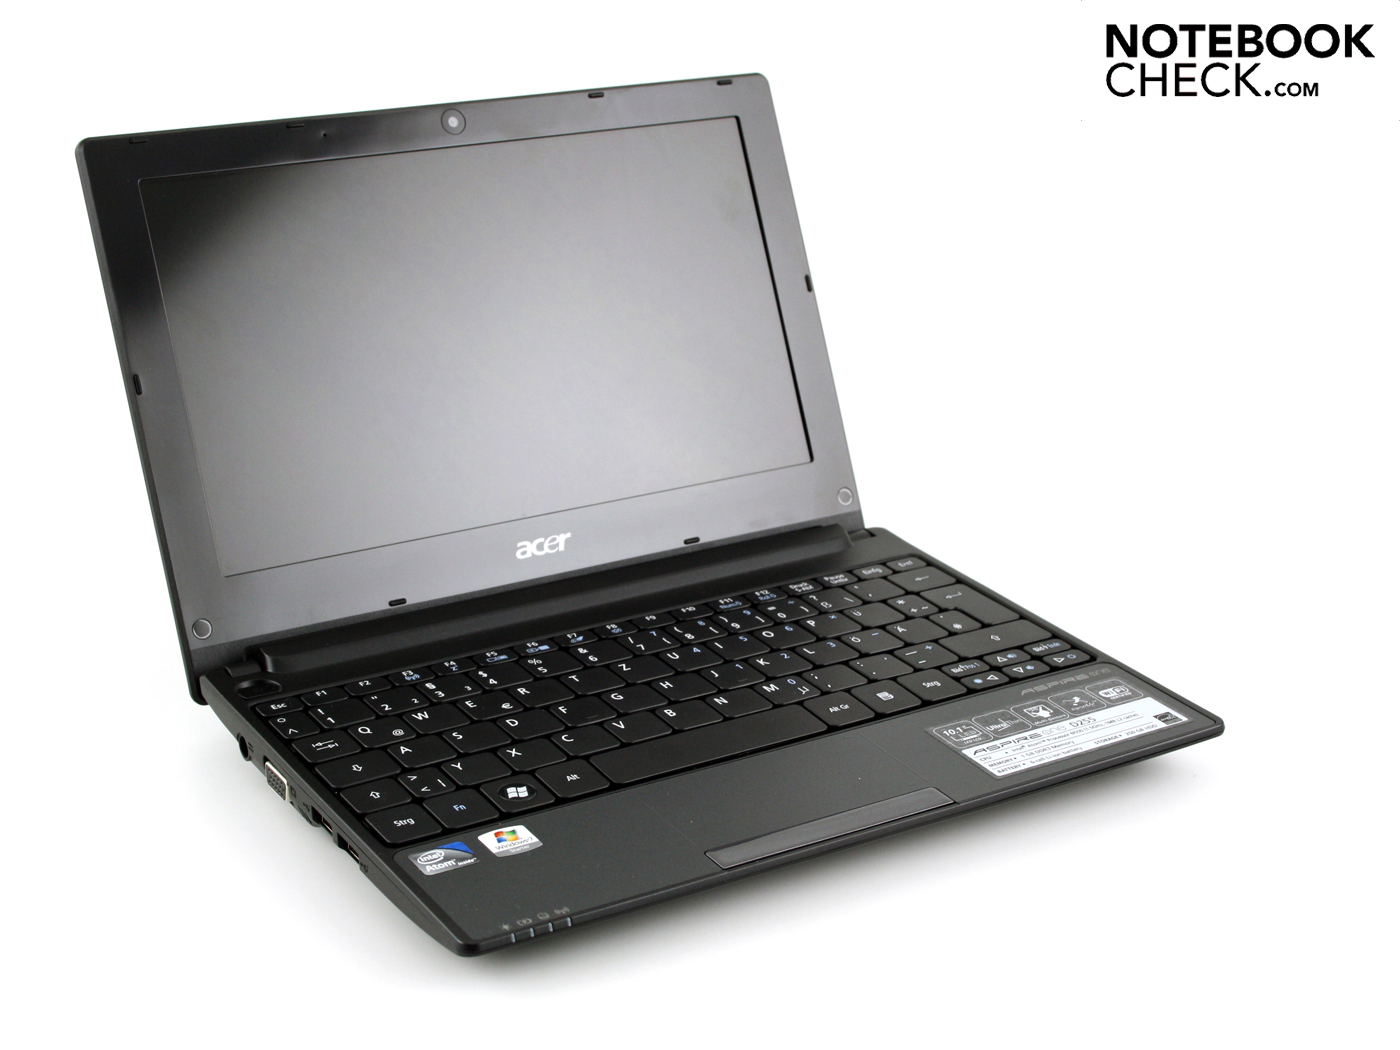 Acer Aspire one d255.